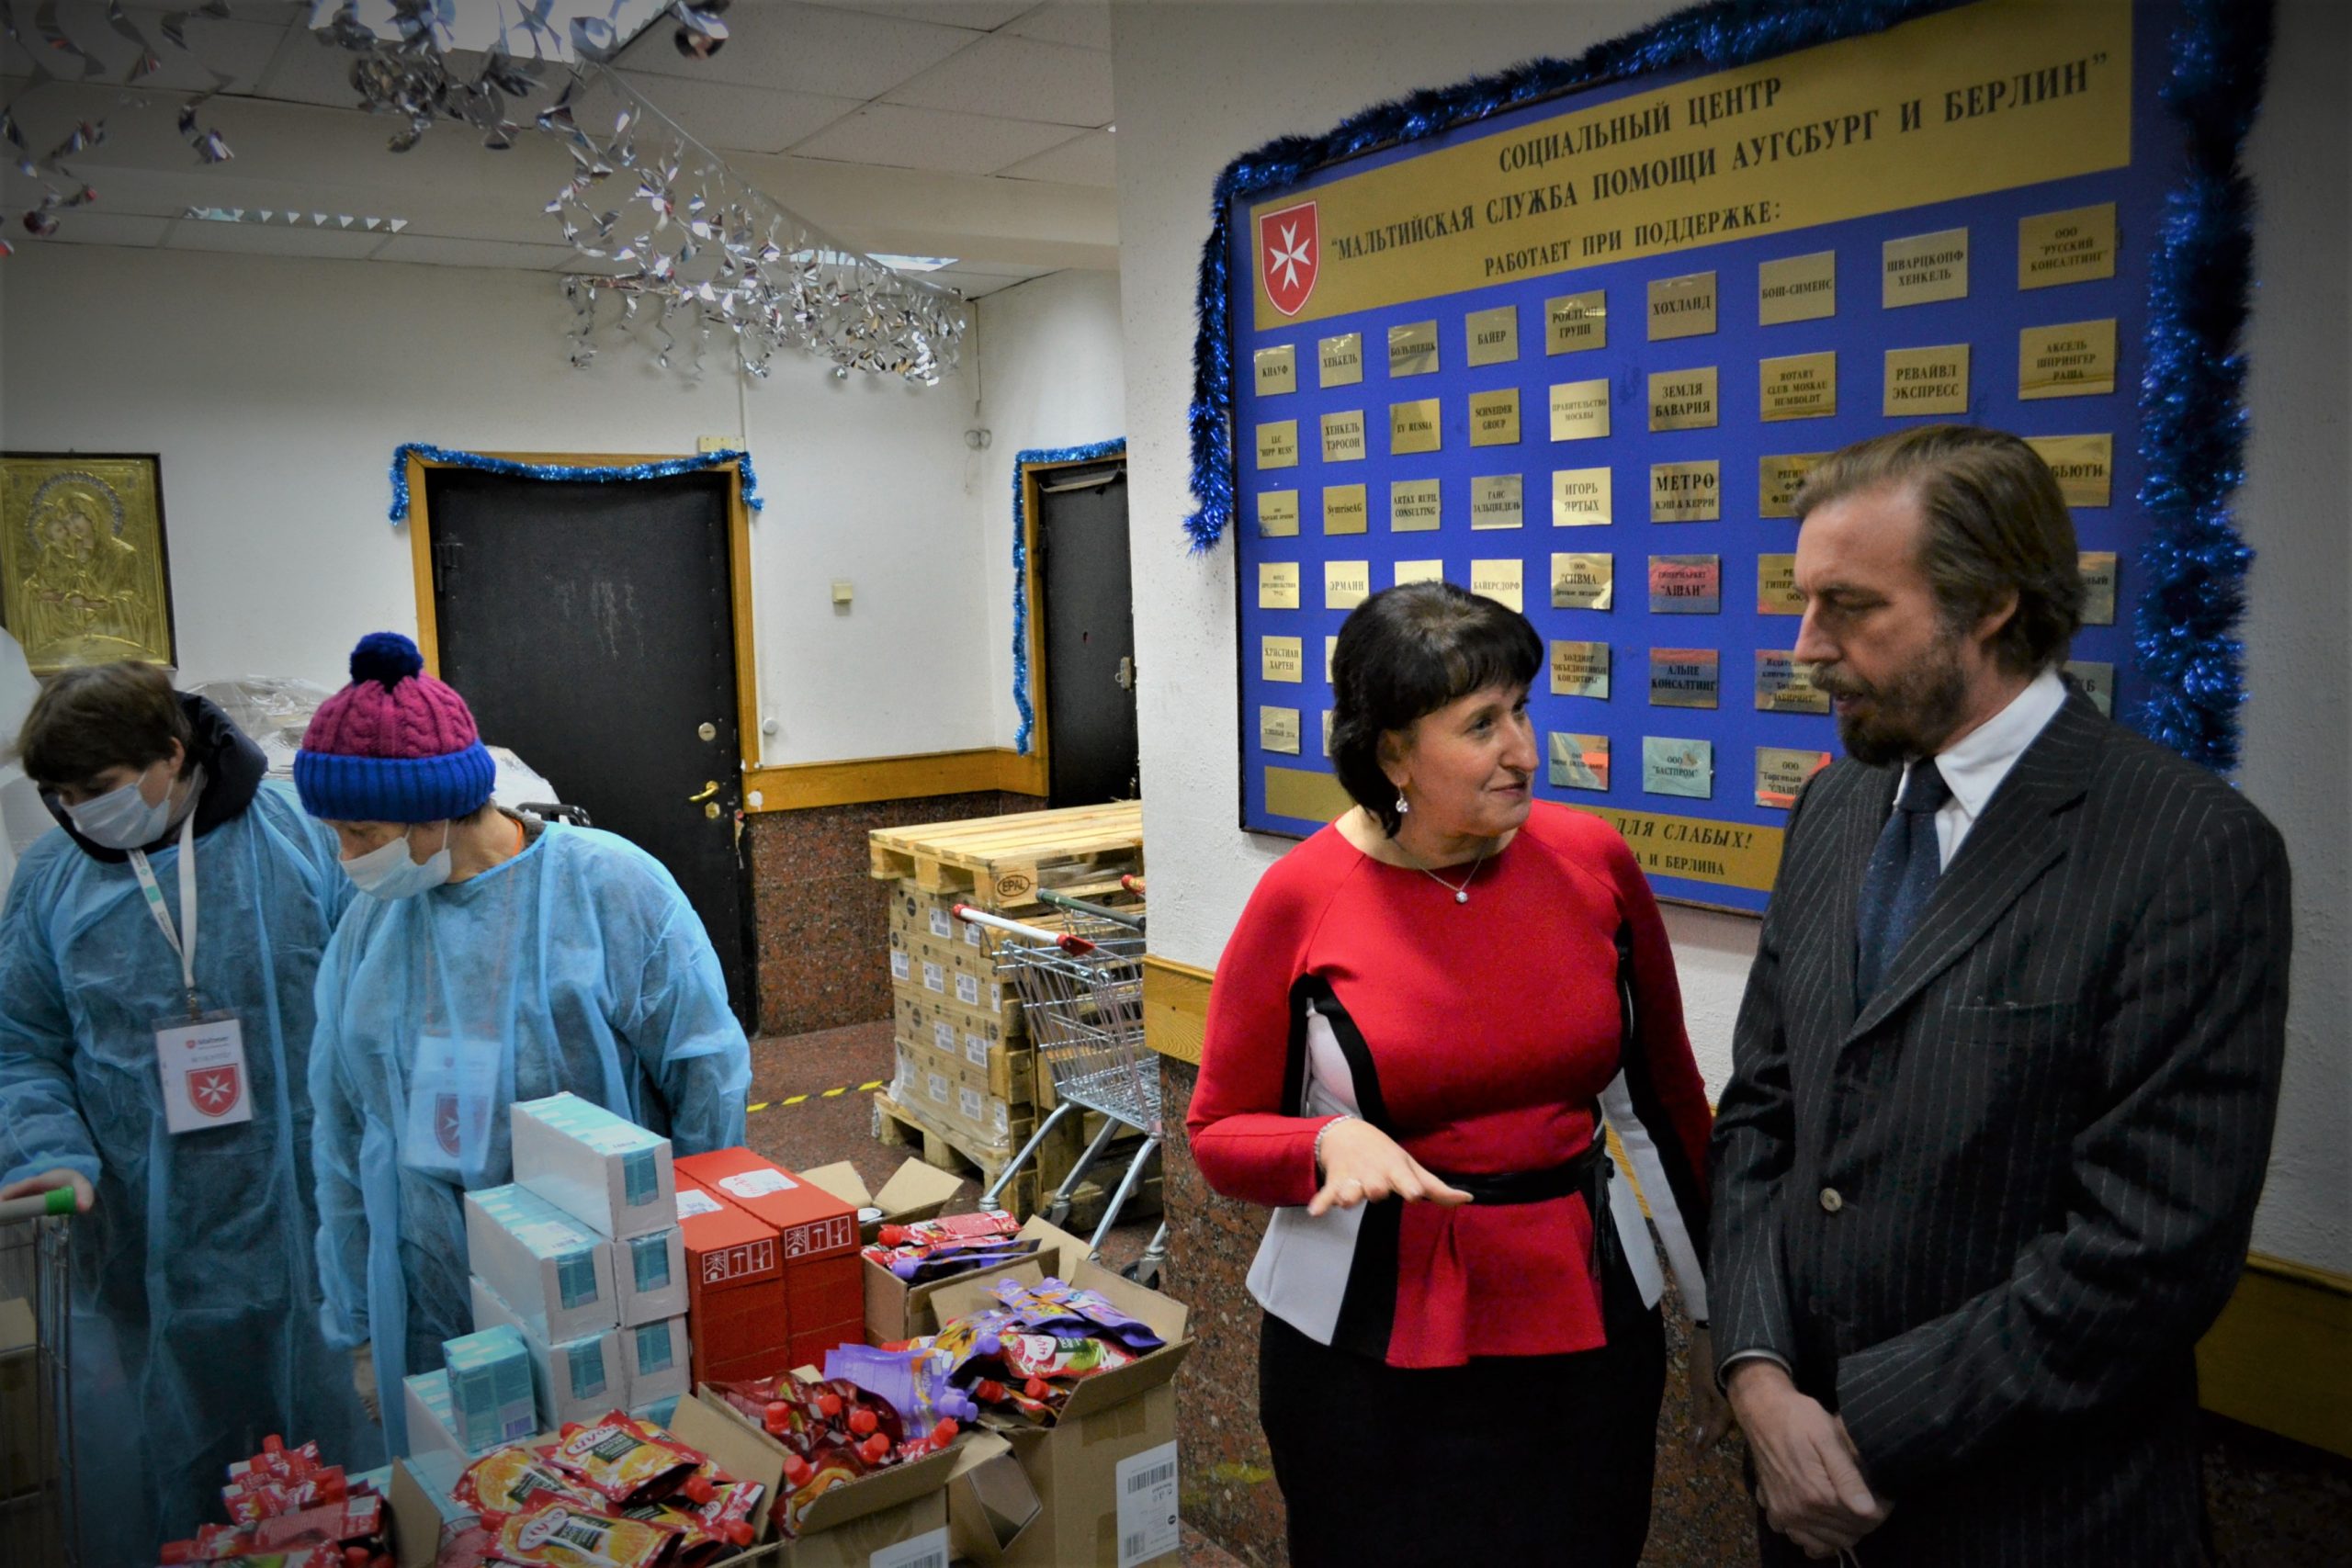 Visit to the Charity Fund “Malteser Aid Service in Moscow”